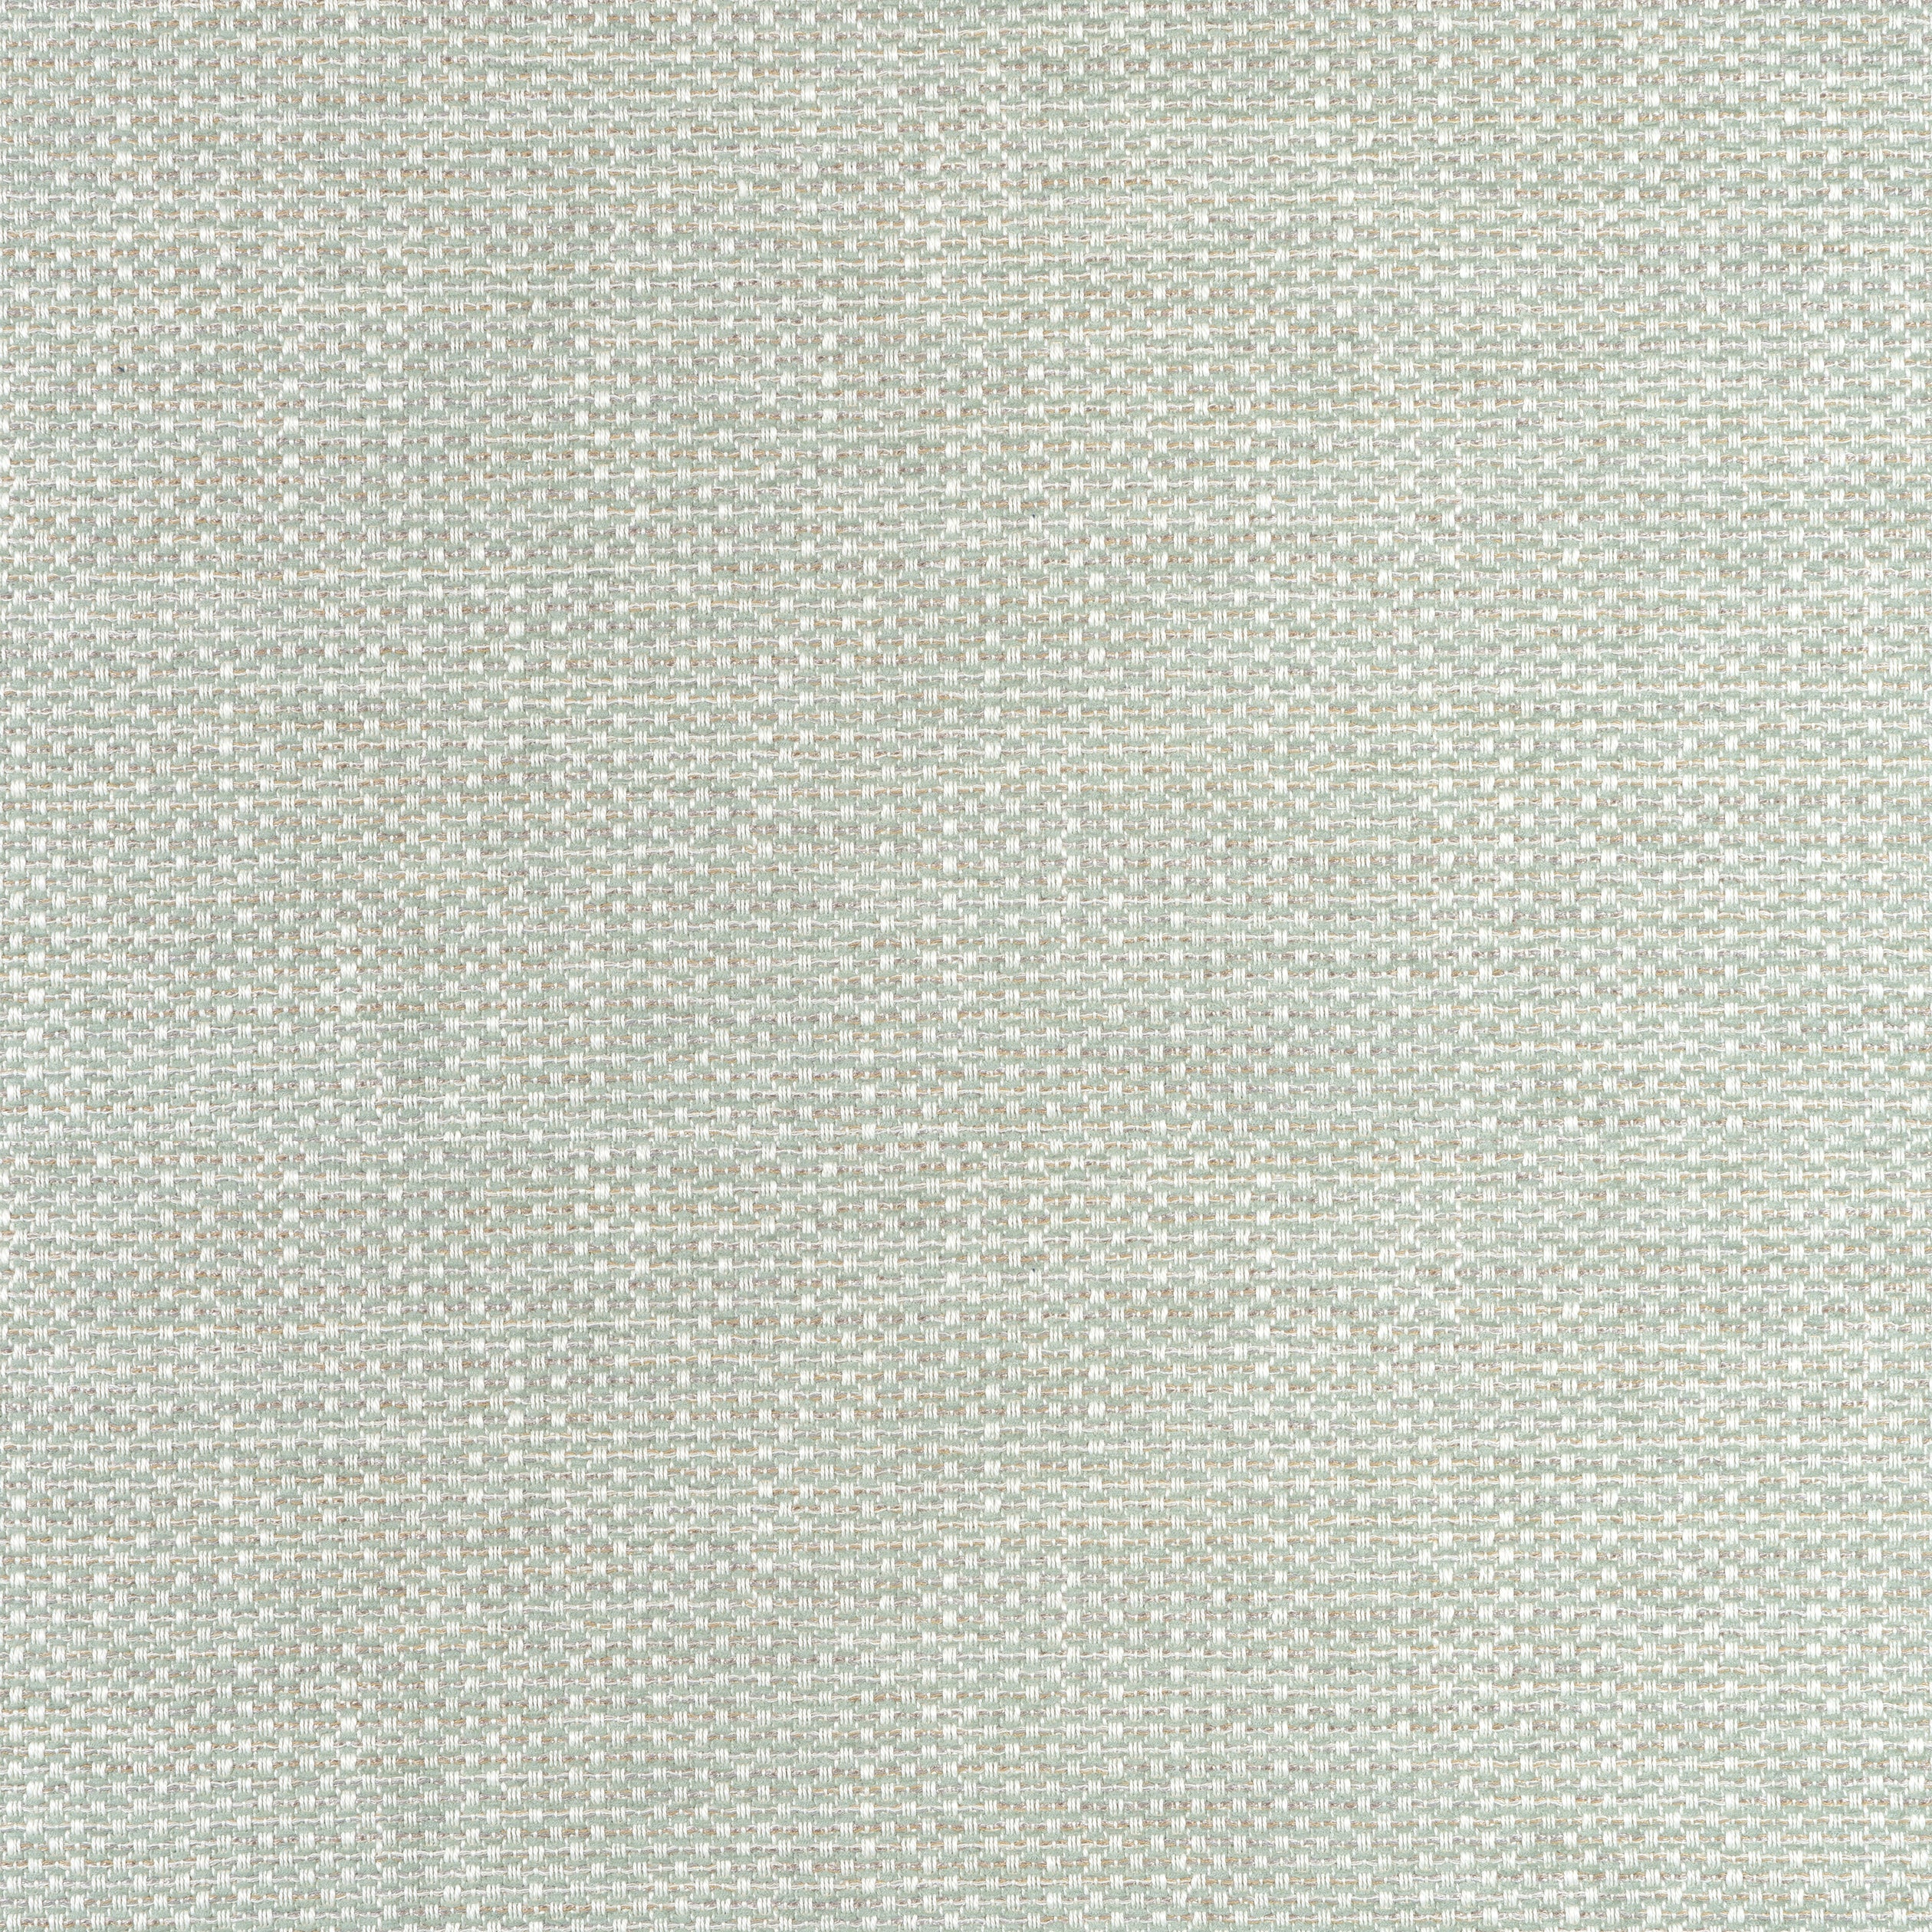 Cascade fabric in celadon color - pattern number W75257 - by Thibaut in the Elements collection